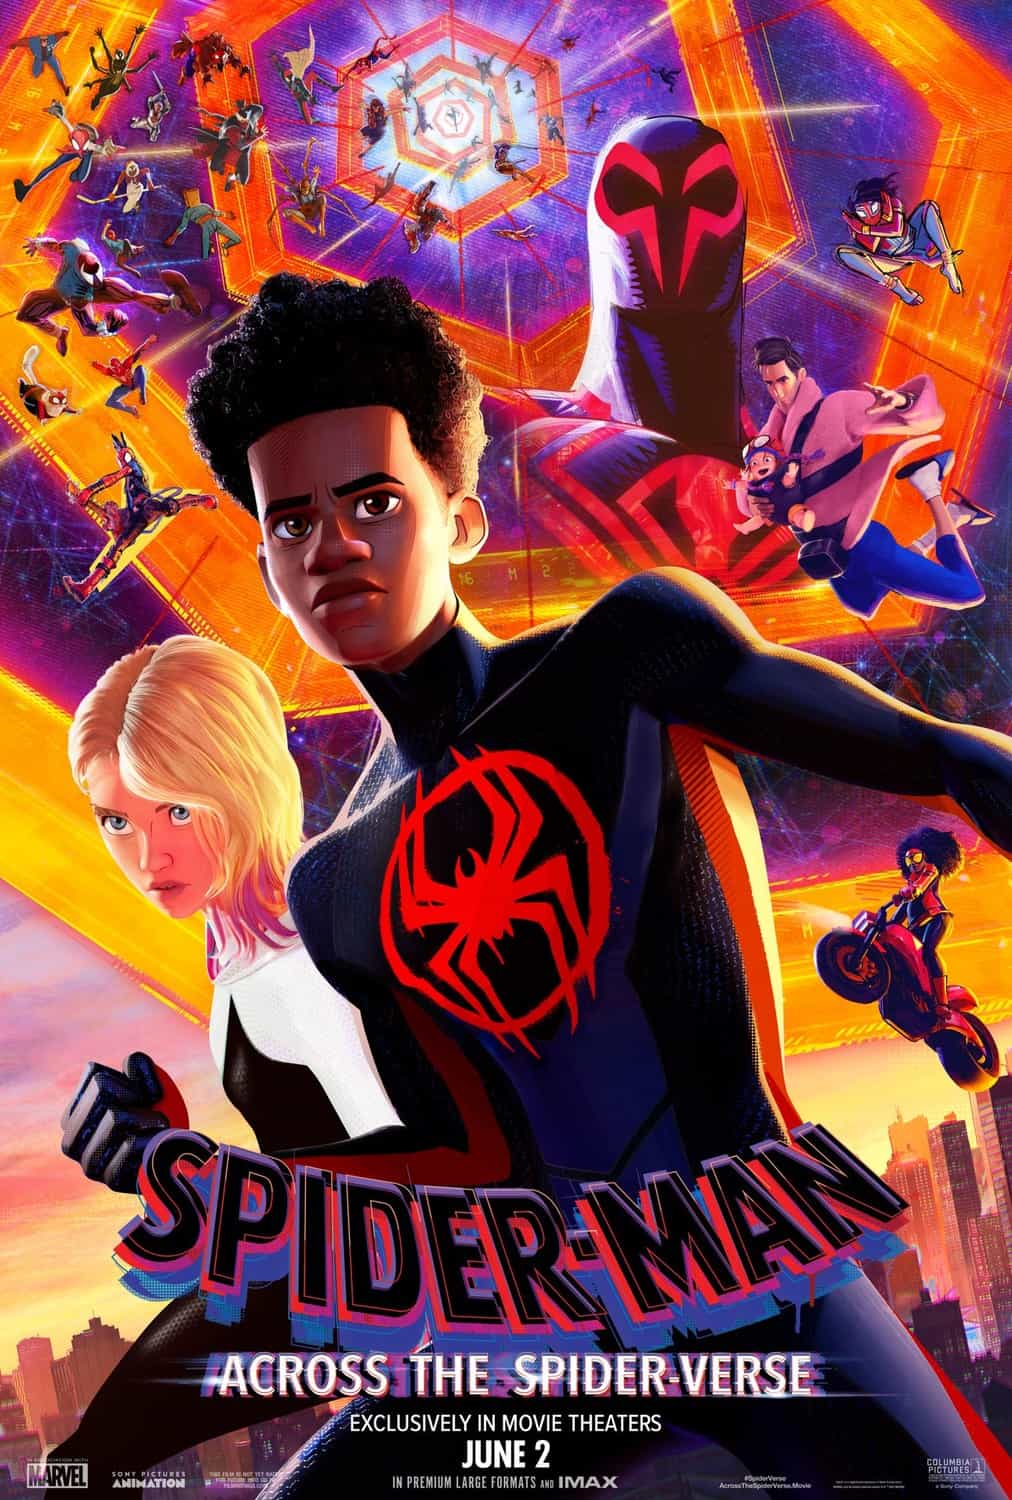 New poster released for Spider-Man: Across the Spider-Verse starring Shameik Moore - movie UK release date 9th June 2023 #spidermanacrossthespiderverse